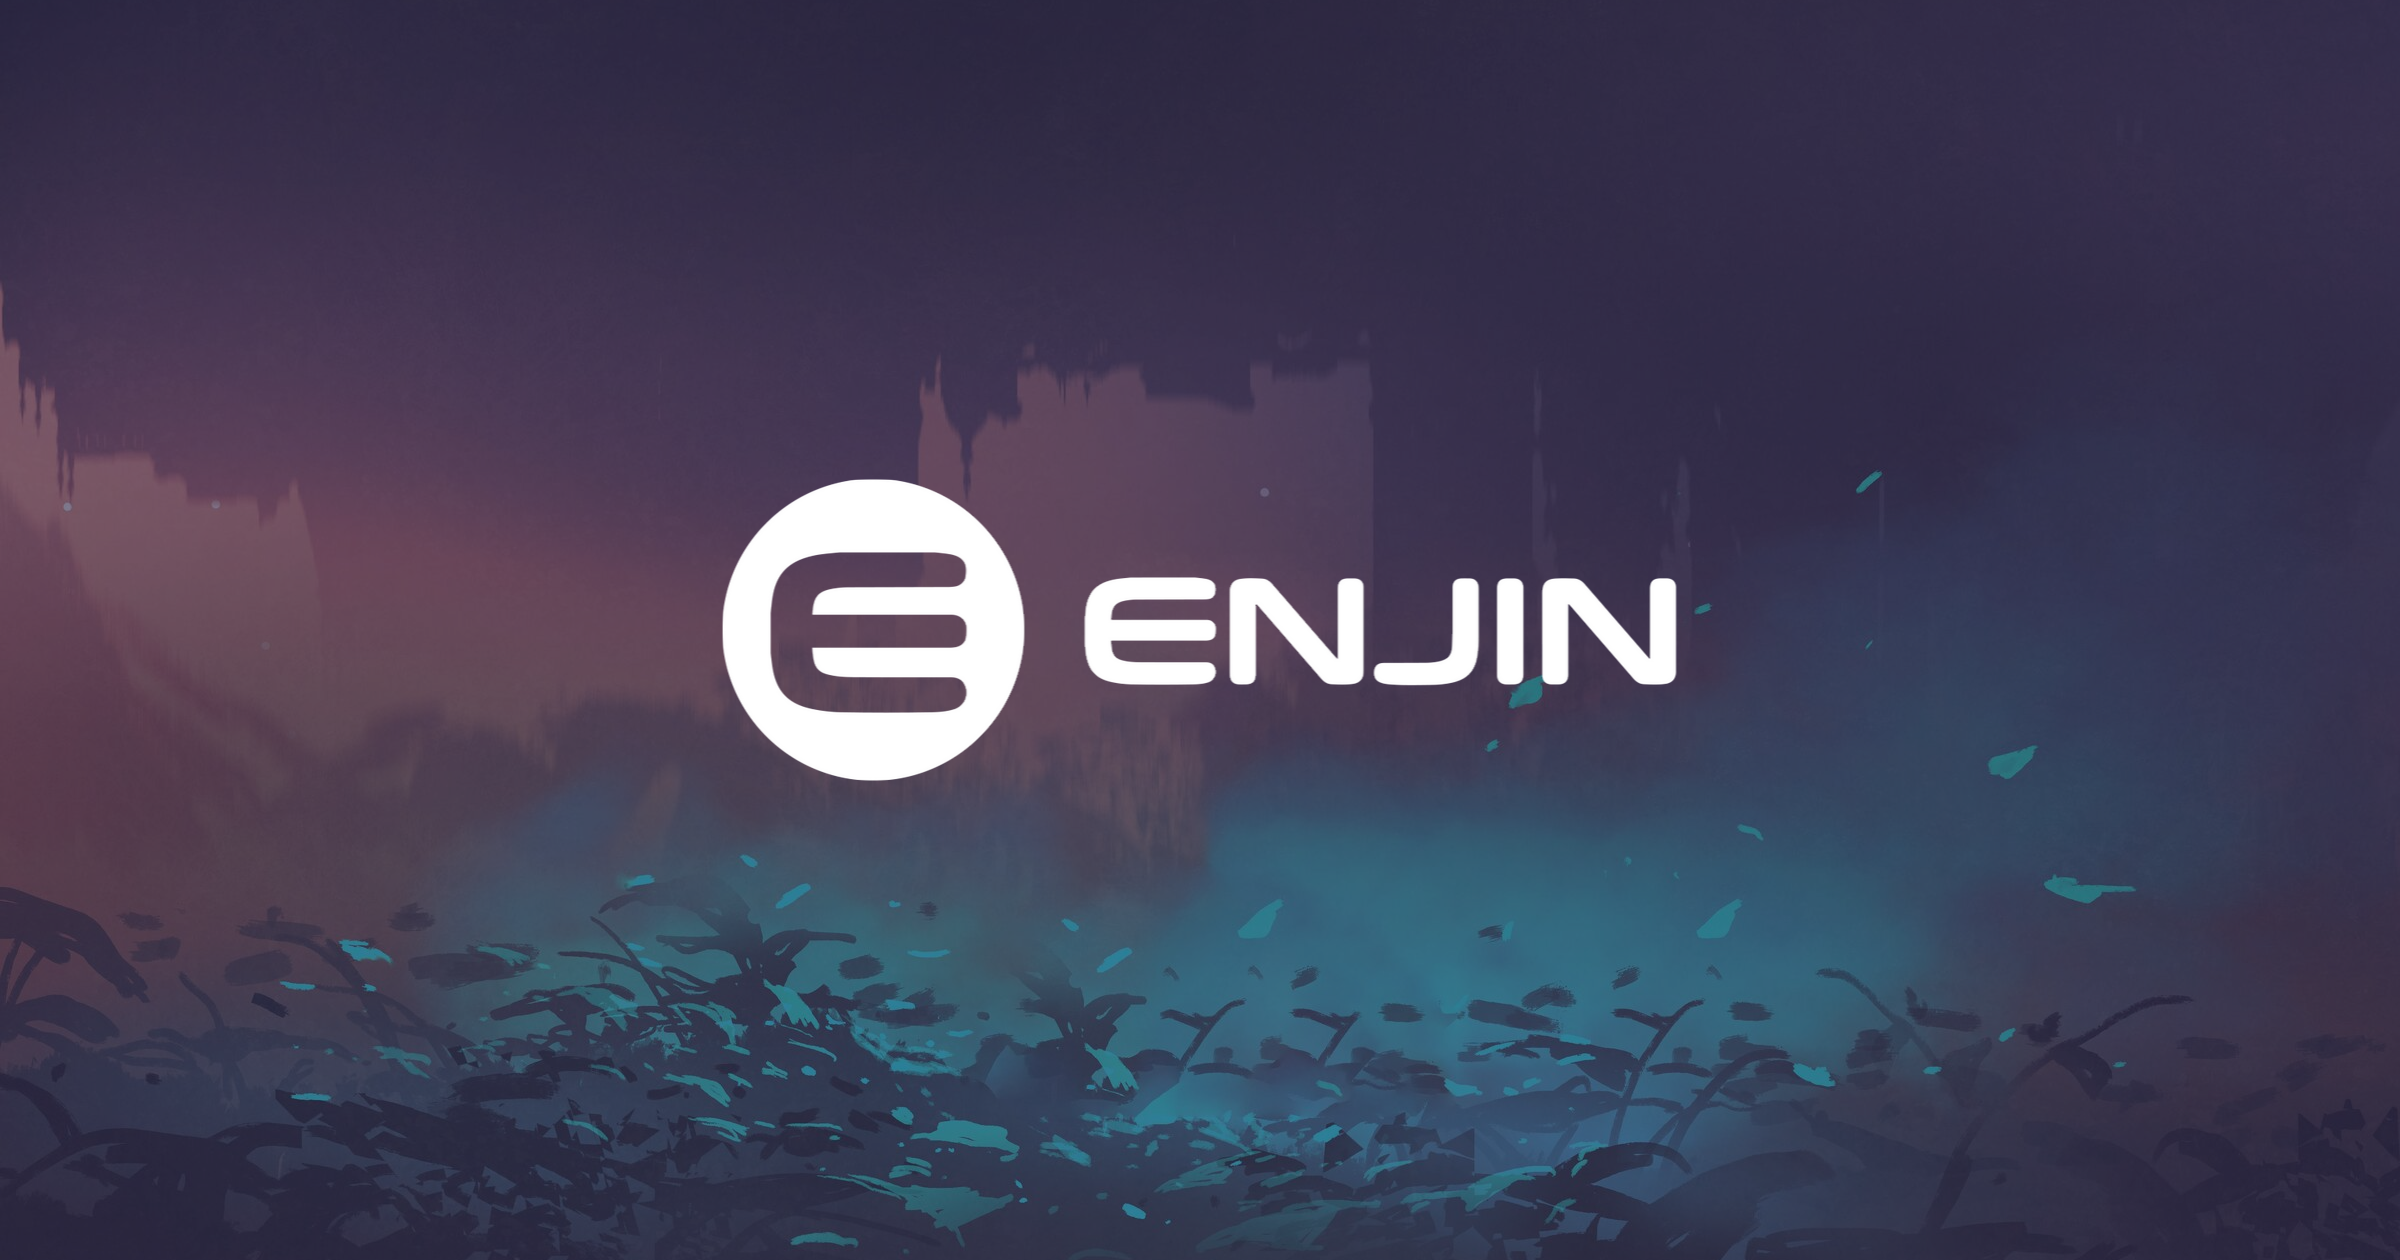 200 Million NFTs Moved From Ethereum To Enjin Blockchain